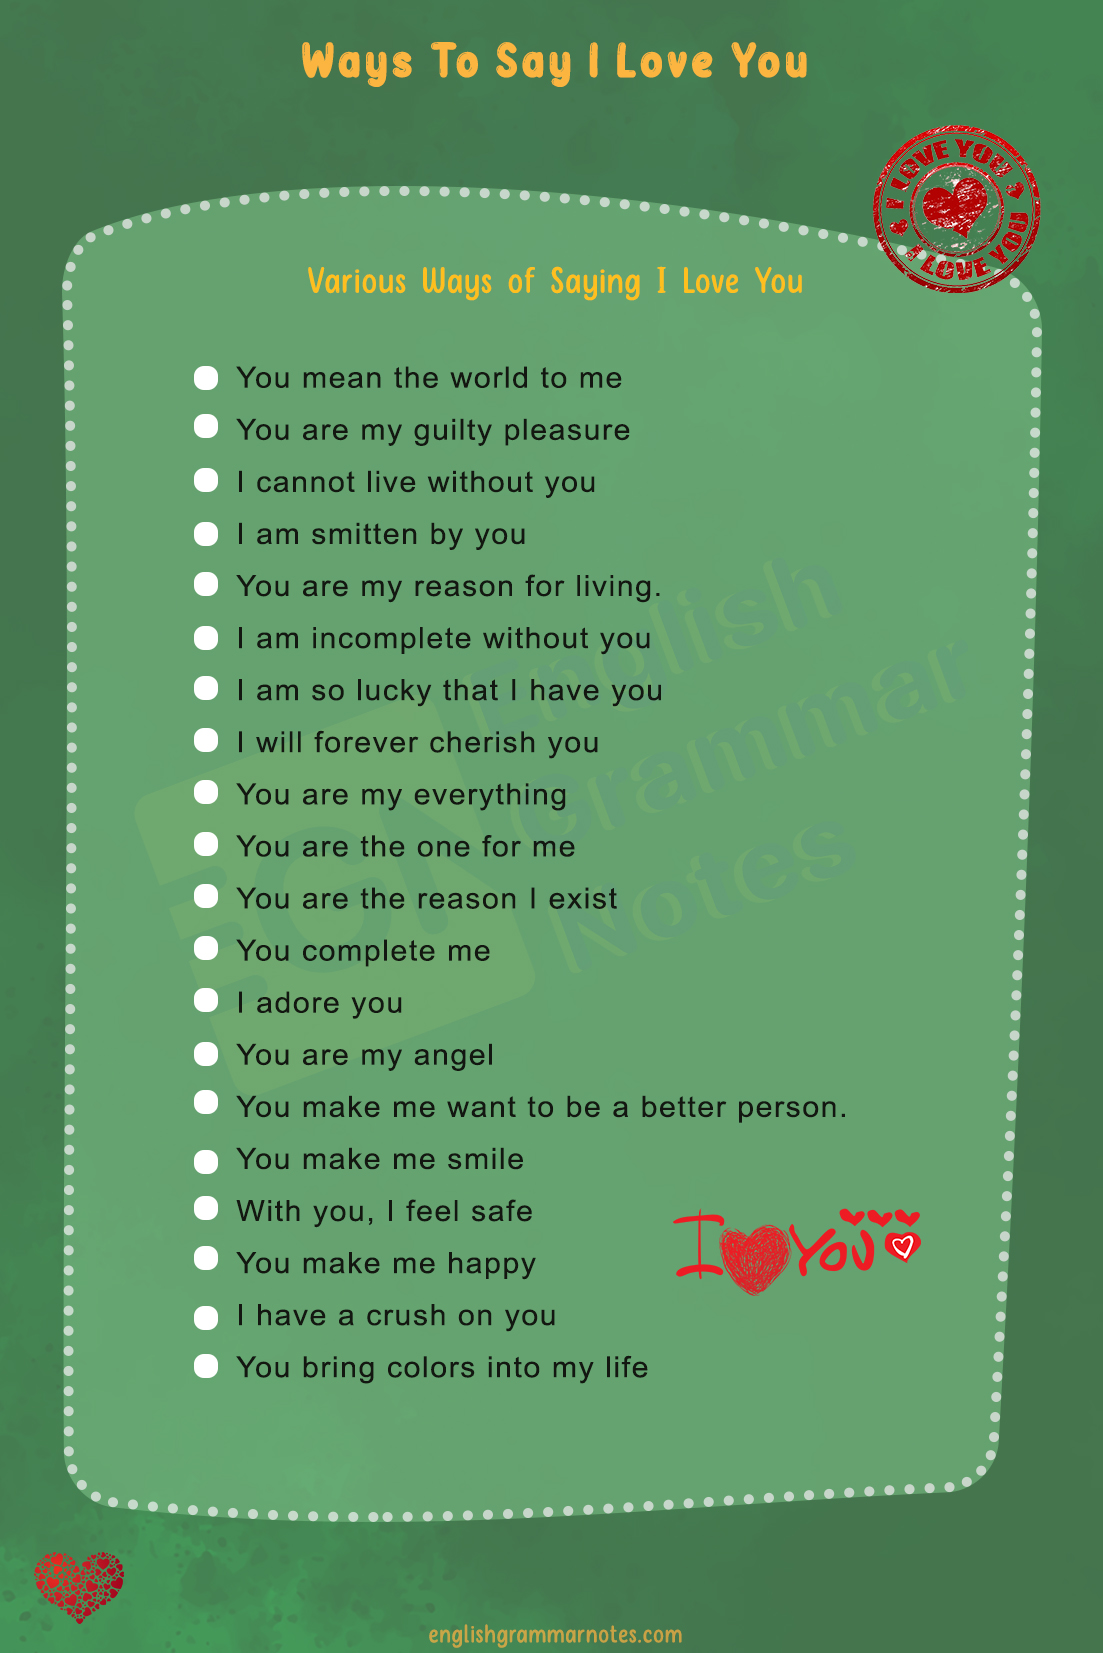 Ways To Say I Love You 1